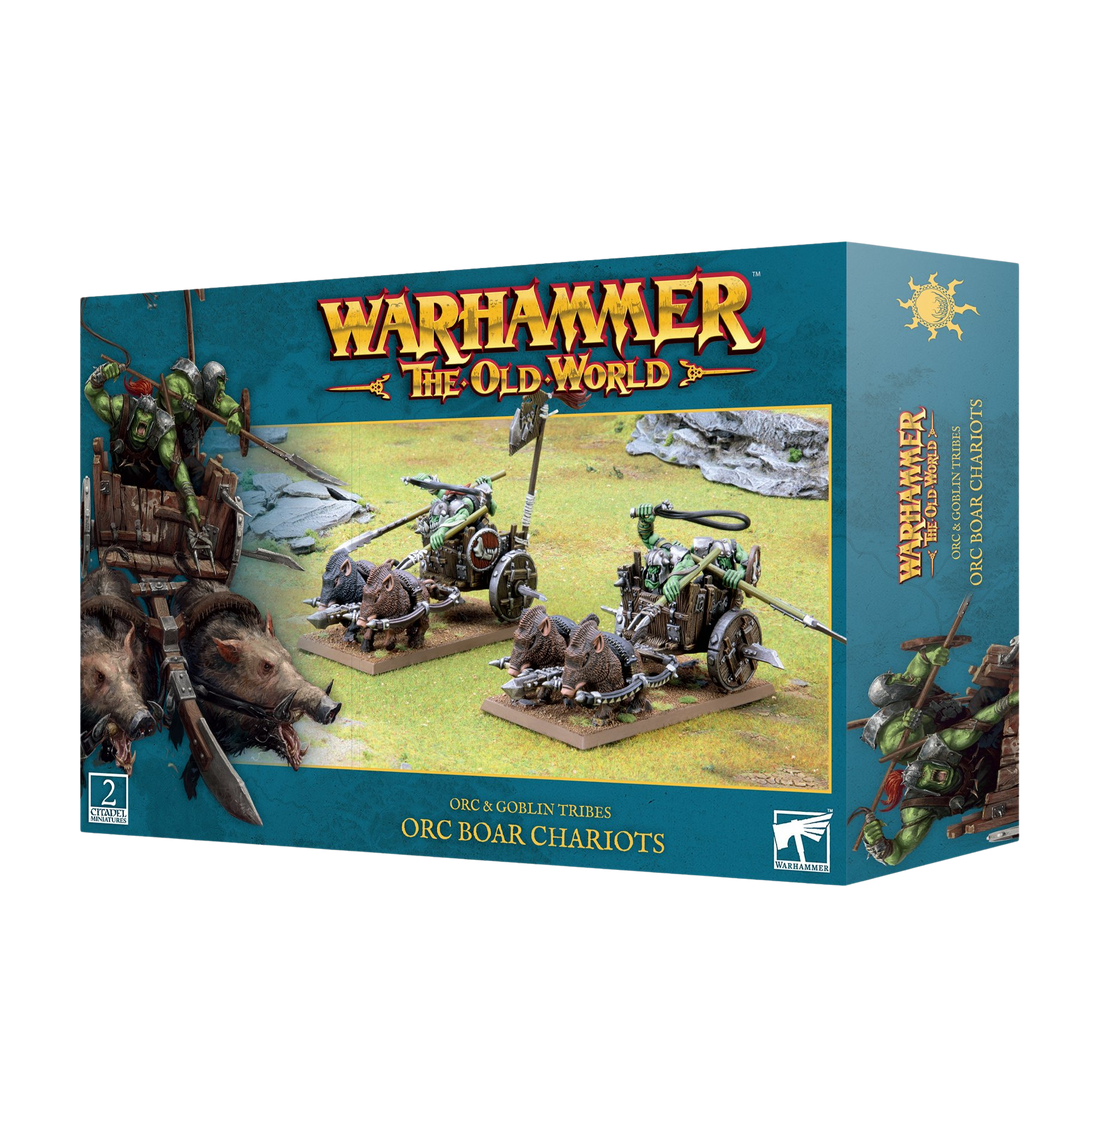 ORC & GOBLIN TRIBES: Orc Boar Chariots